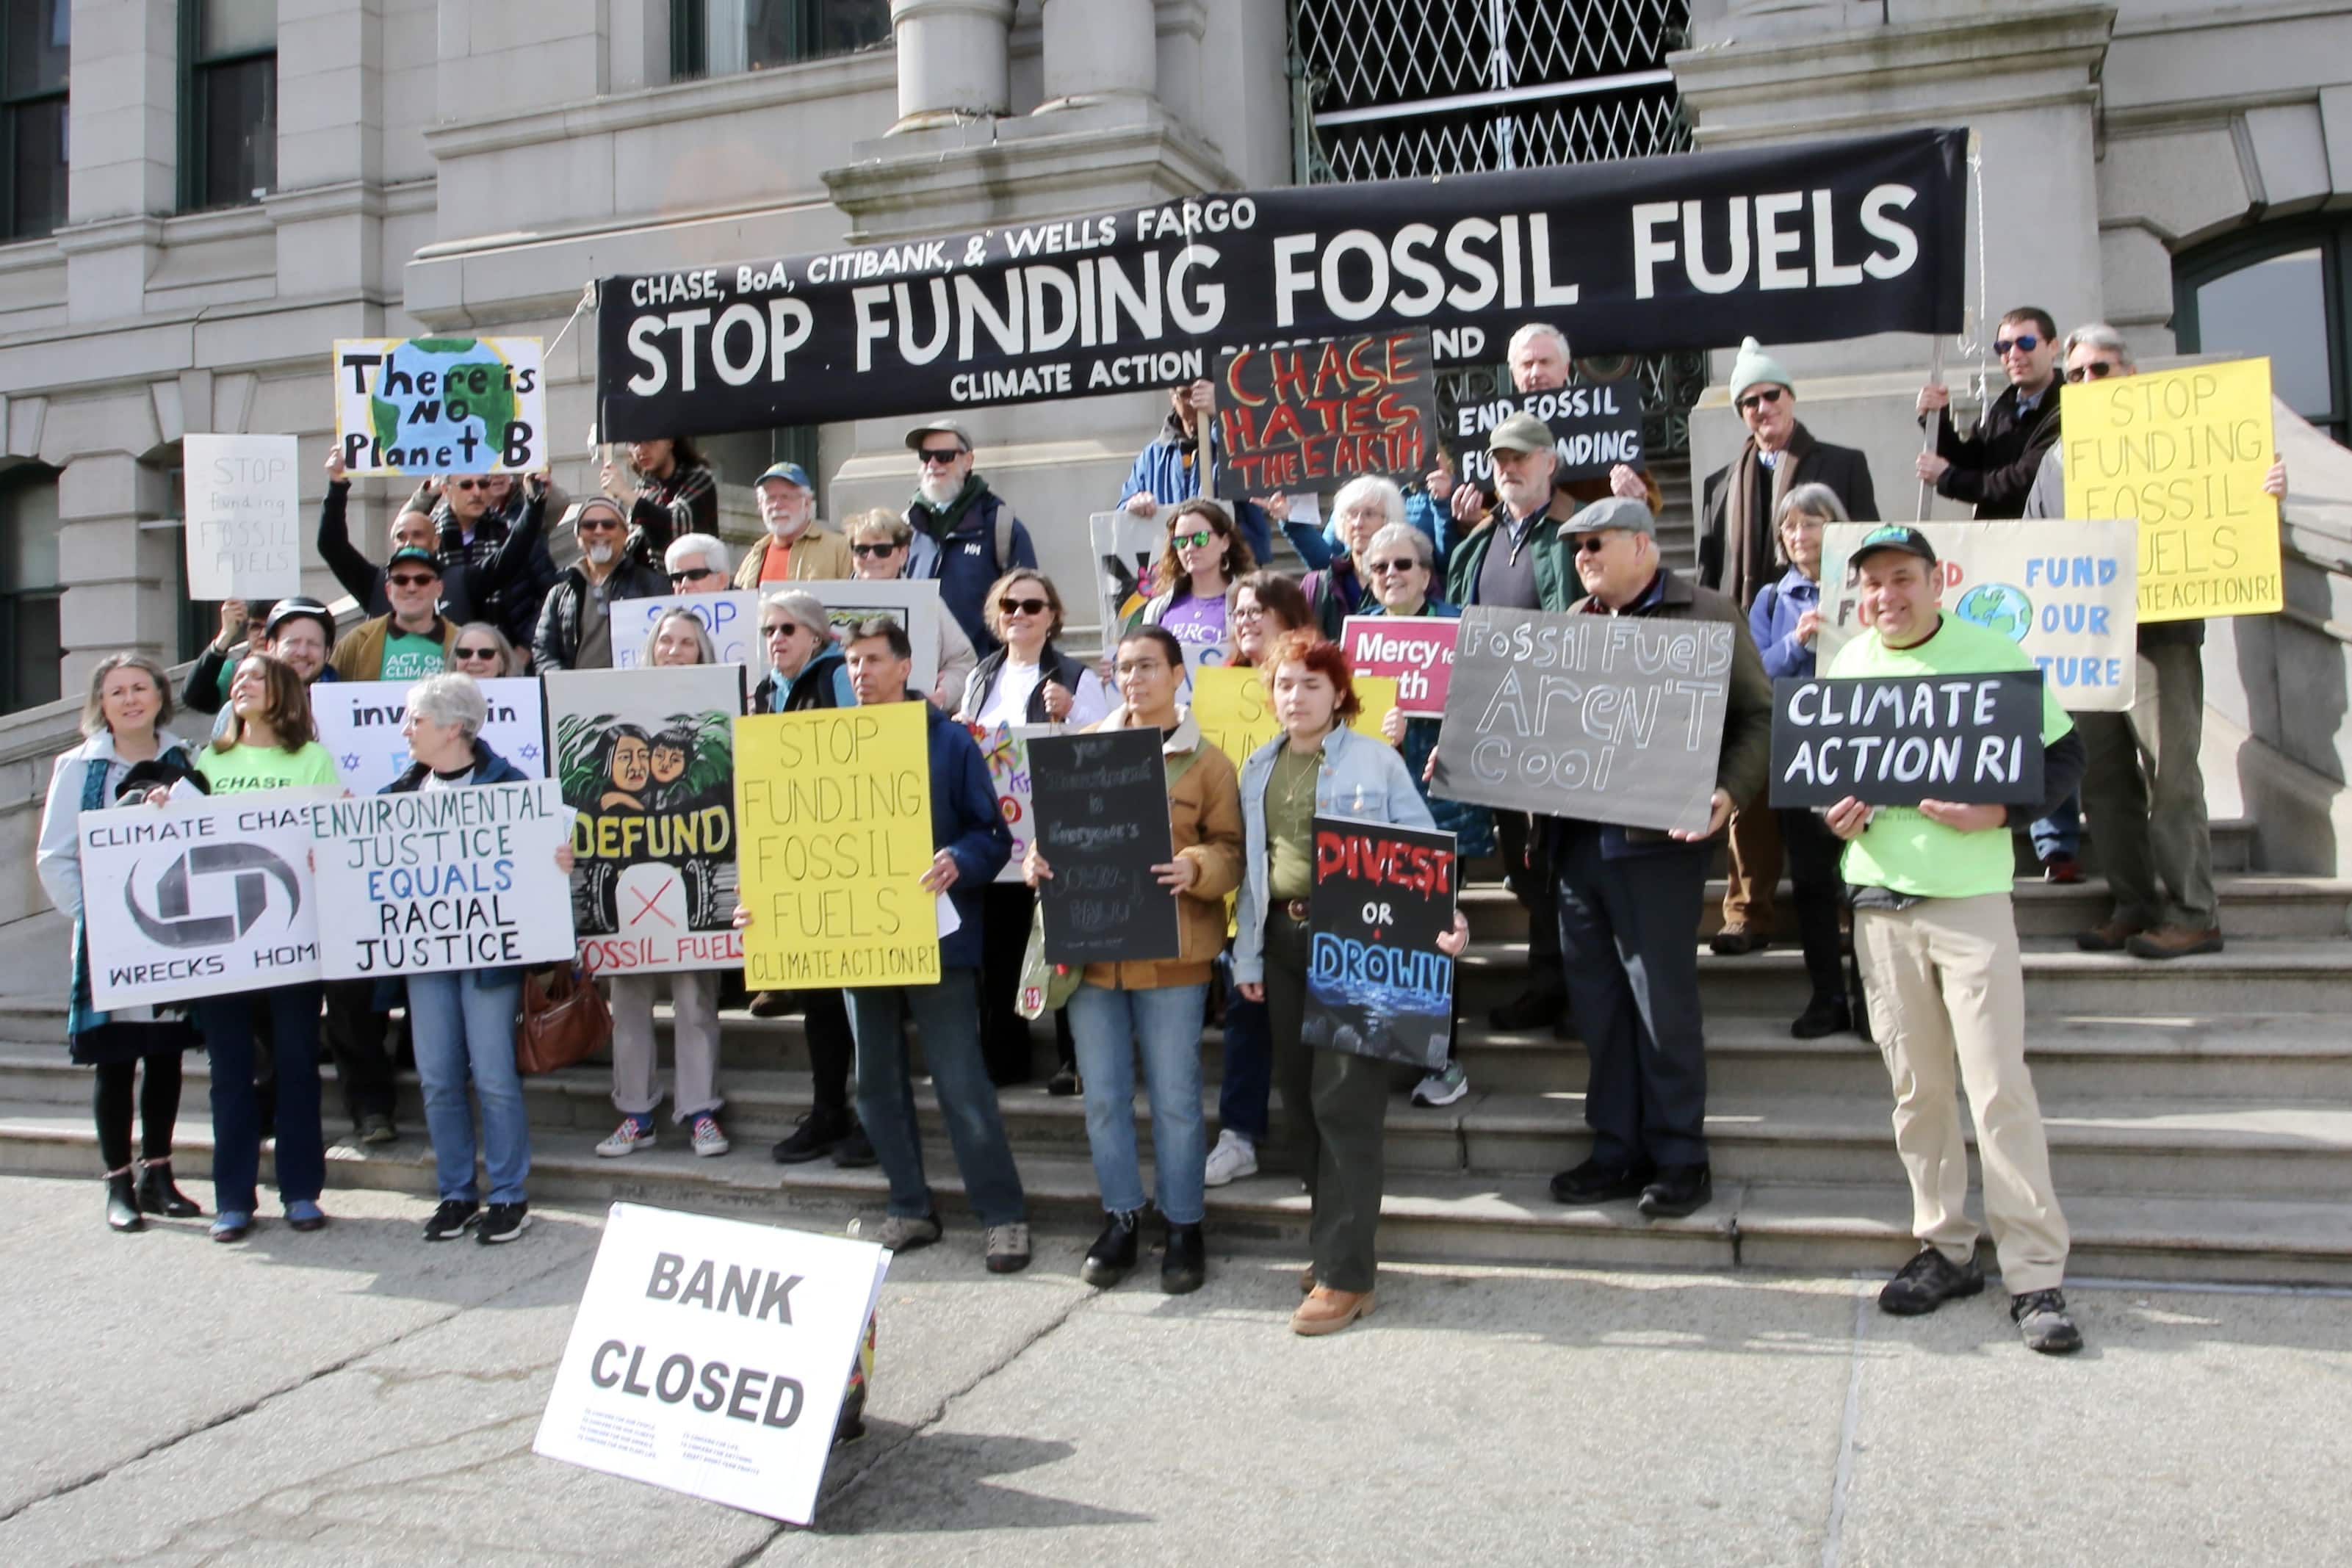 Rhode Island: Campaign seeks to encourage fossil fuel divestment among RI municipalities and non-profits